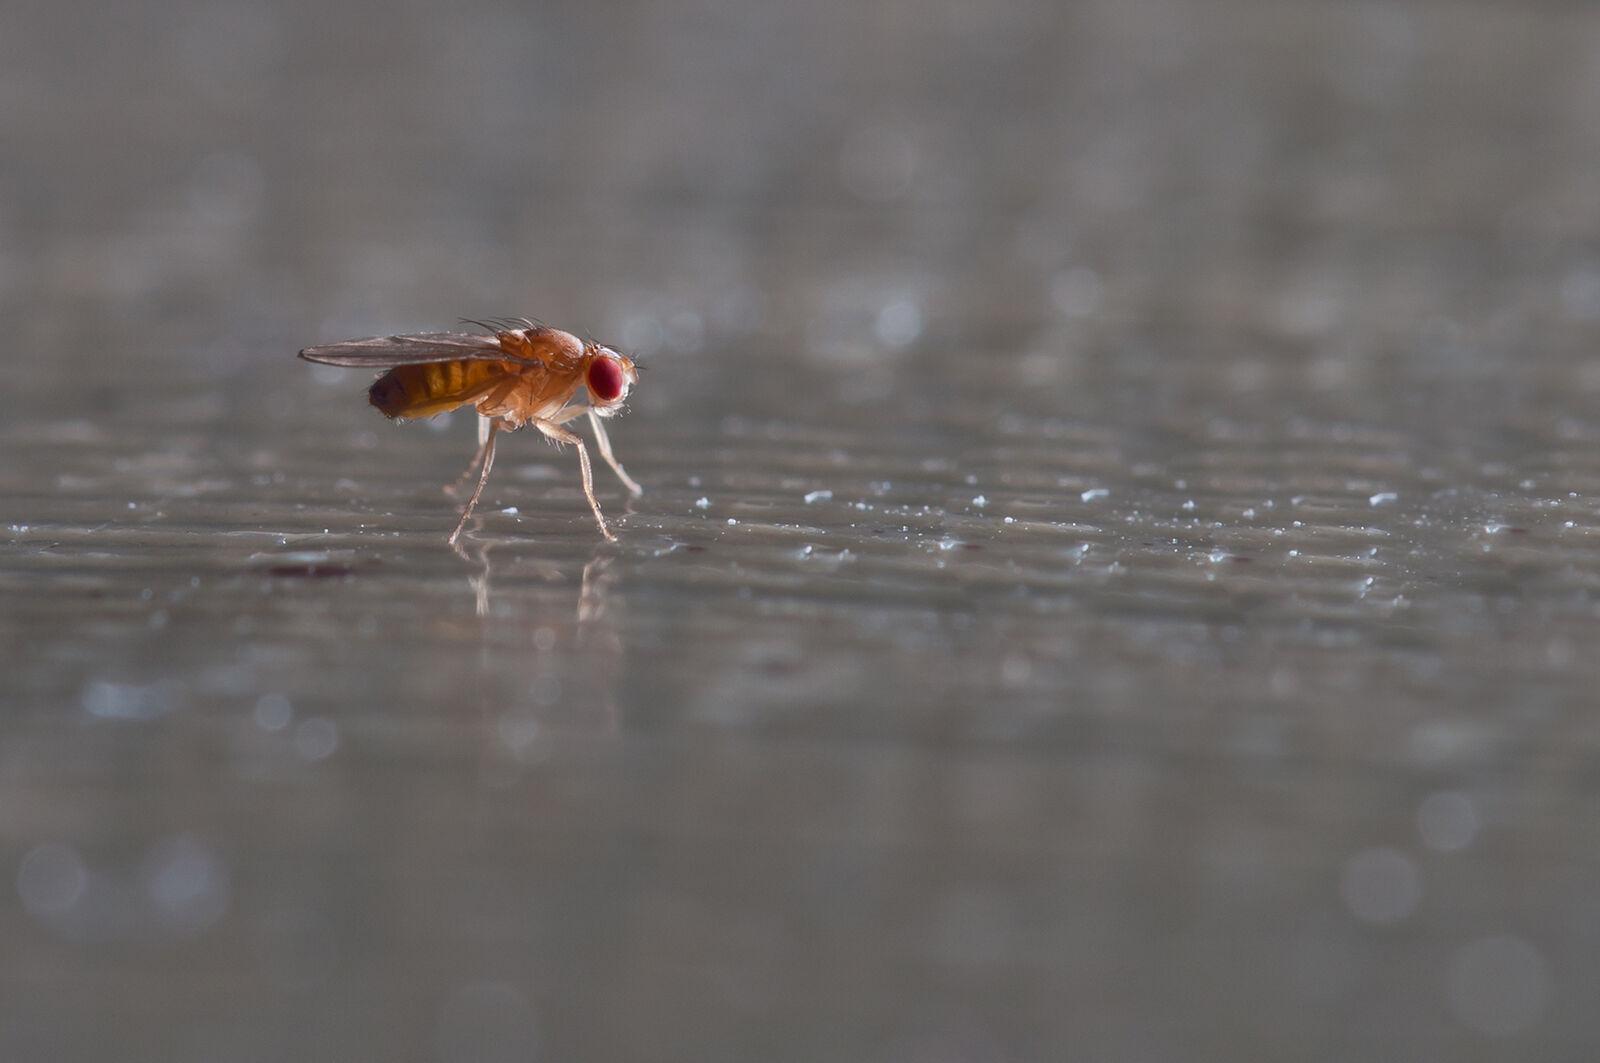 How to really, truly, finally get rid of fungus gnats for good: We asked  the pros, Lifestyle